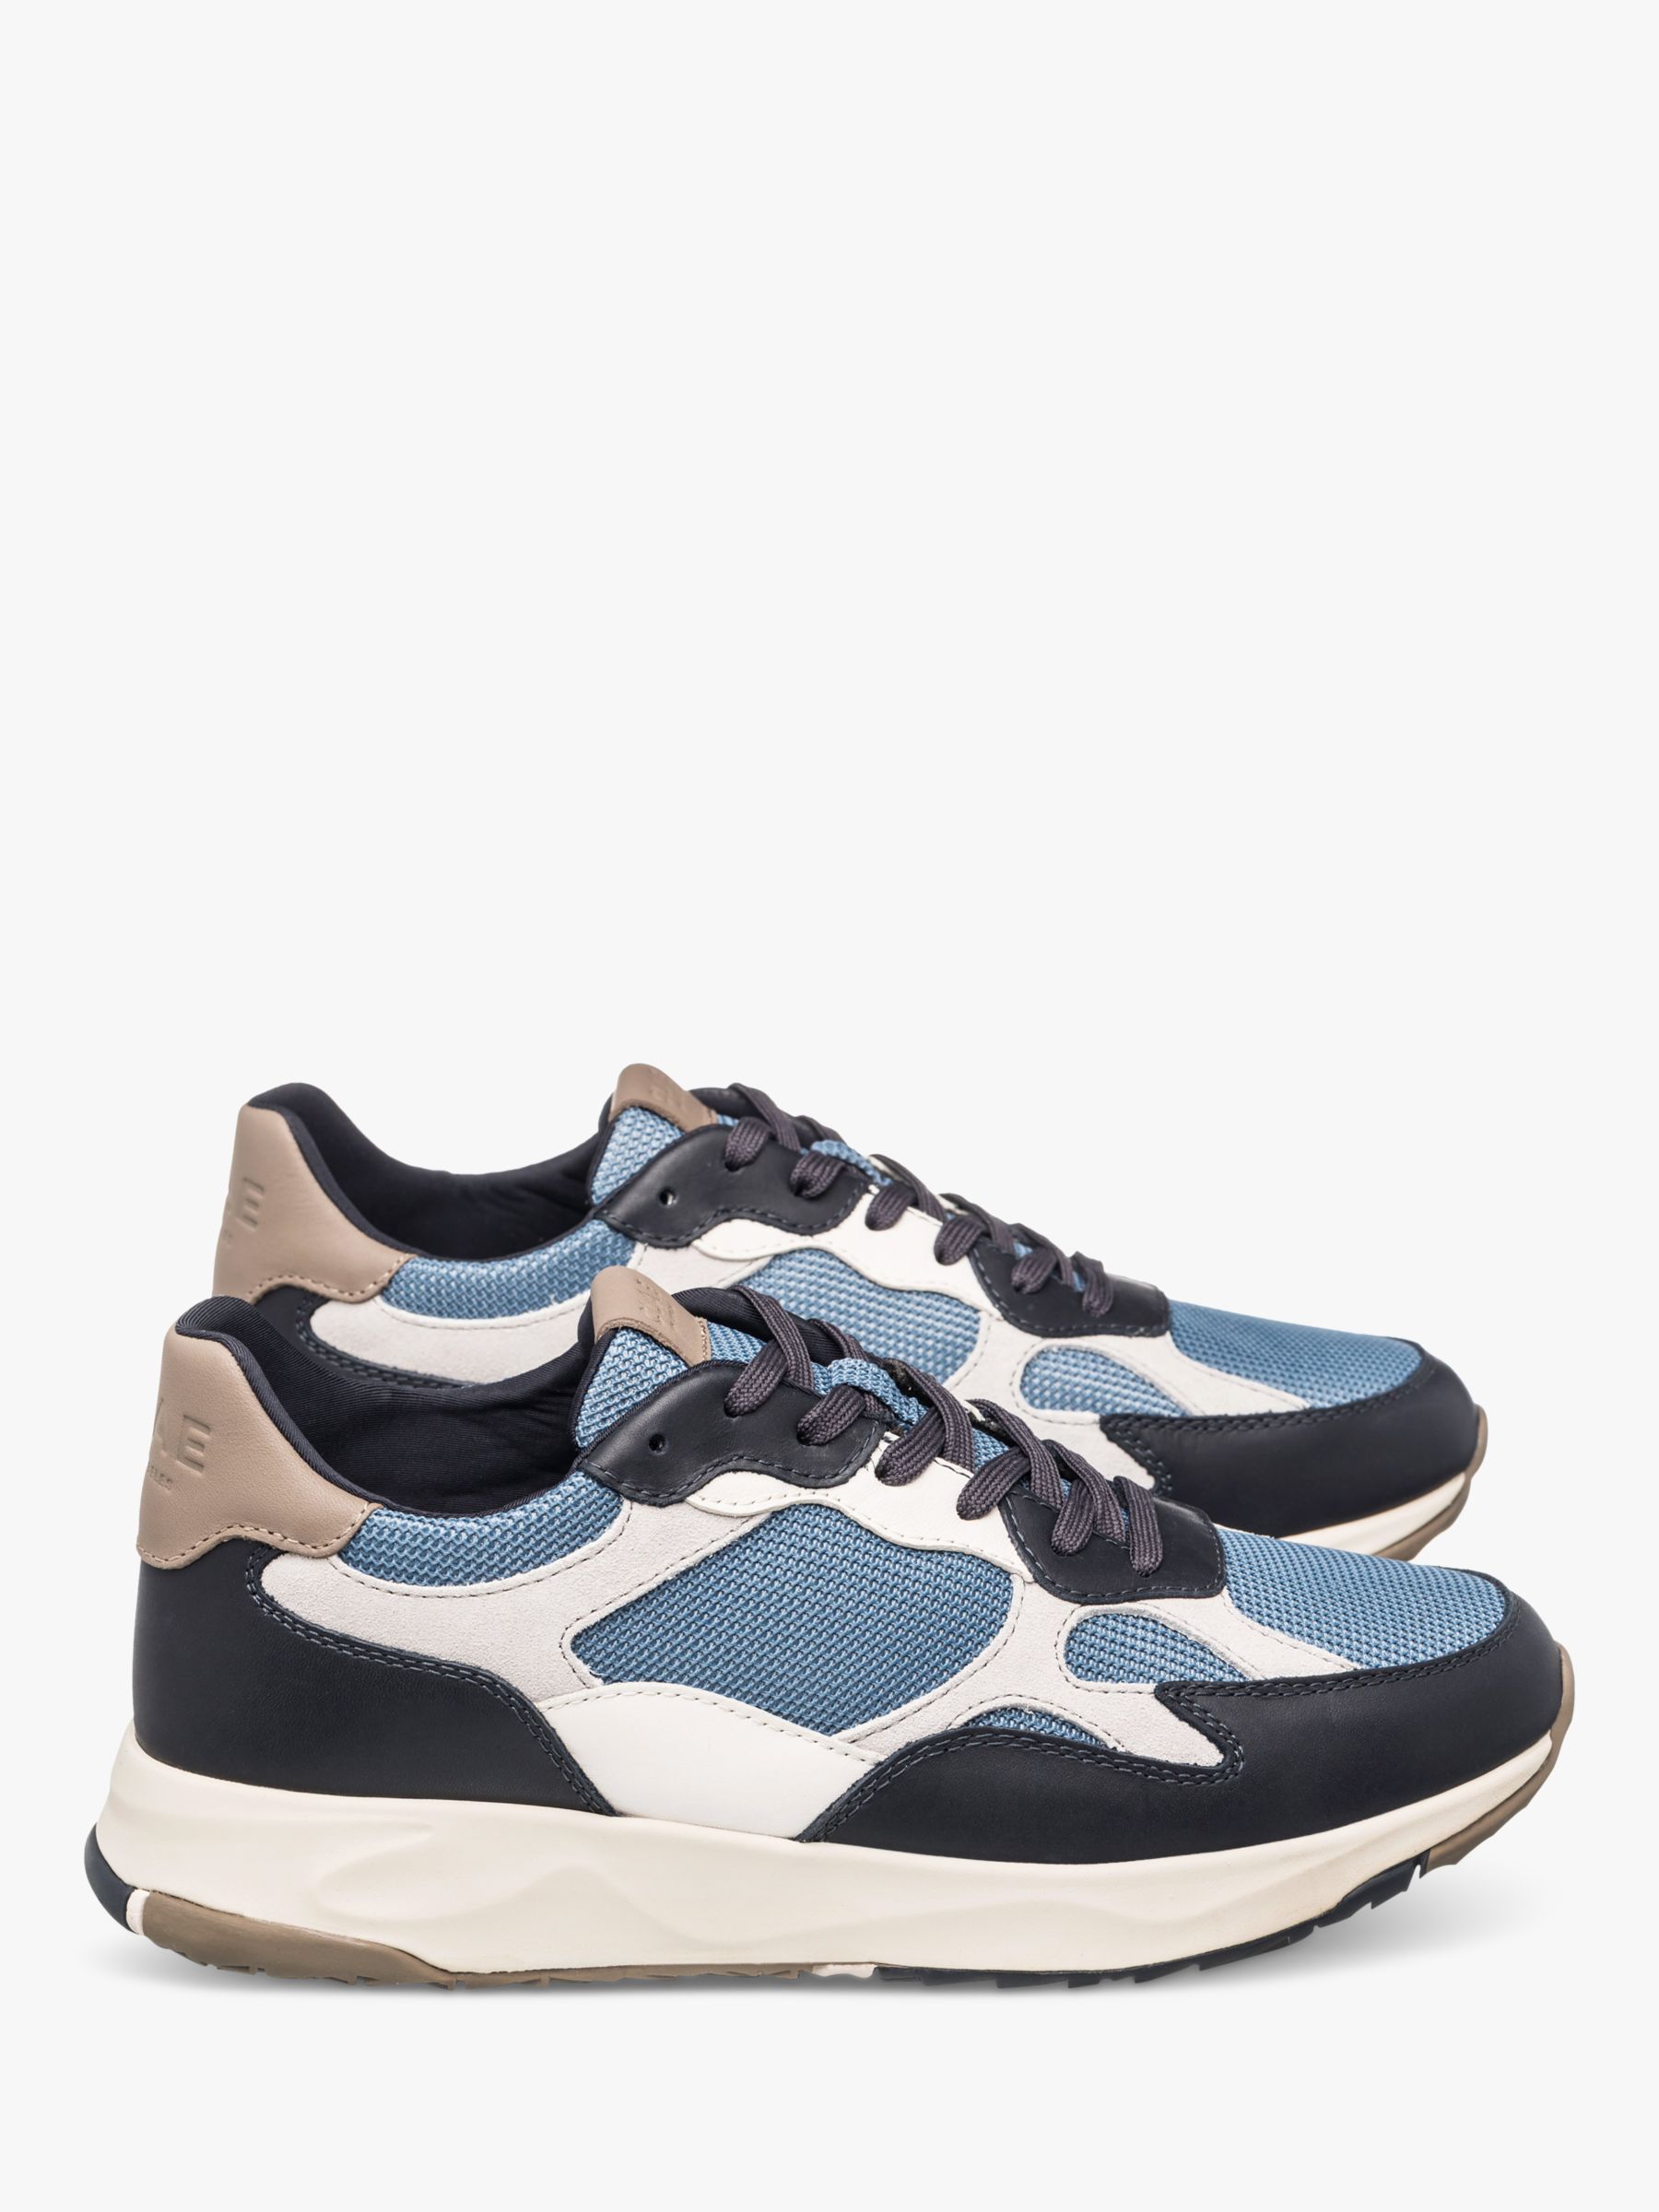 CLAE Zuma NFO Lace Up Trainers, Navy Fossil at John Lewis & Partners